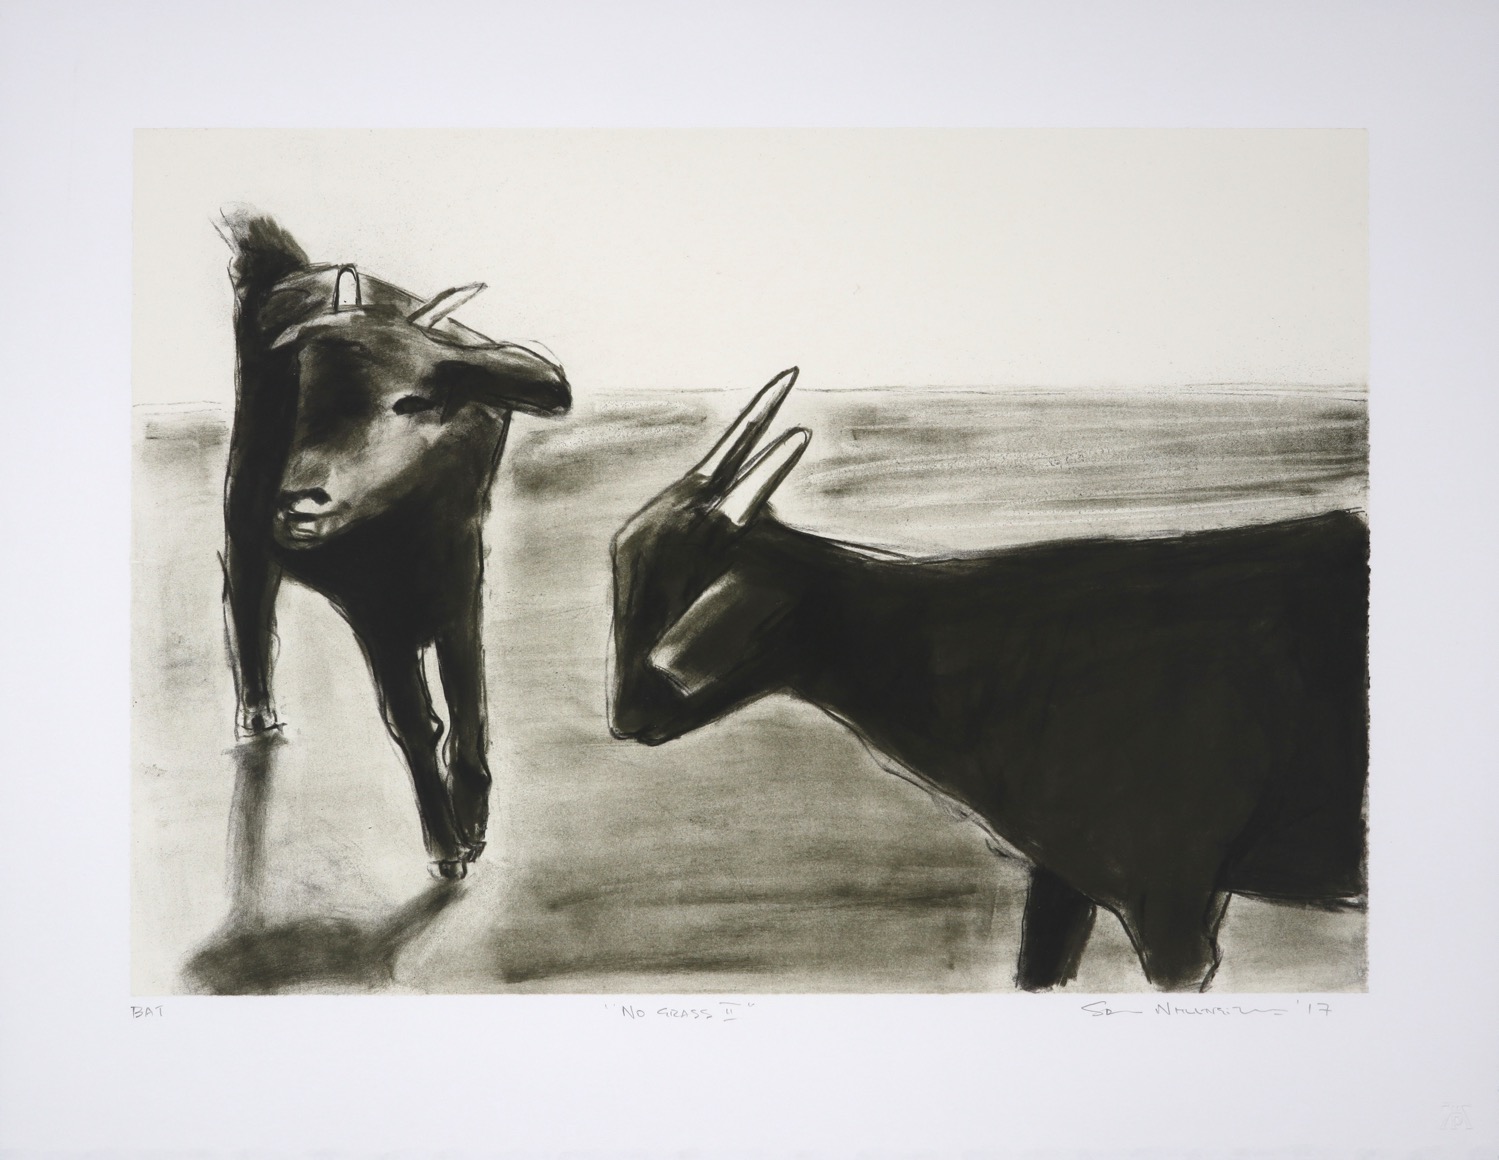 Two goats approaching each other drawn in soft black charcoal